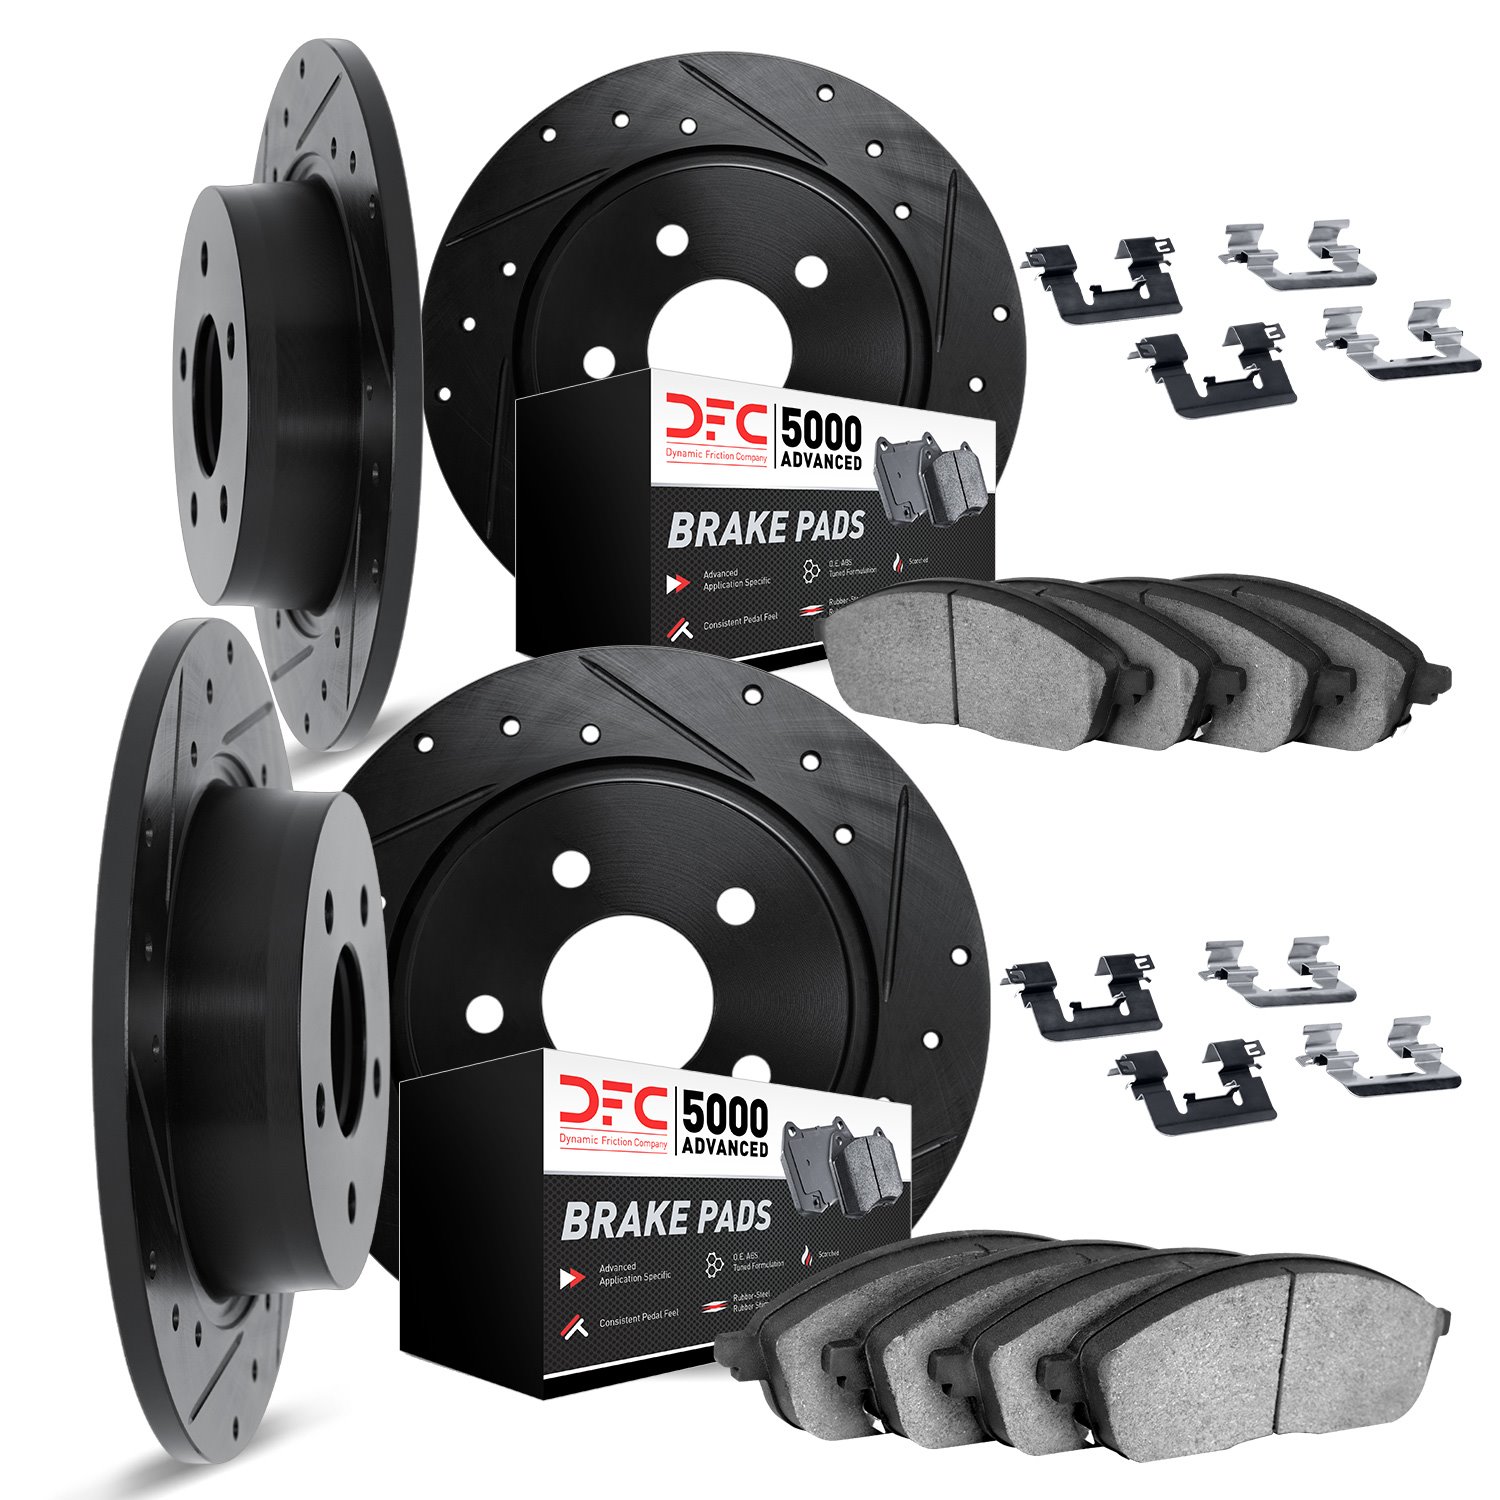 8514-27001 Drilled/Slotted Brake Rotors w/5000 Advanced Brake Pads Kit & Hardware [Black], 1975-1987 Volvo, Position: Front and